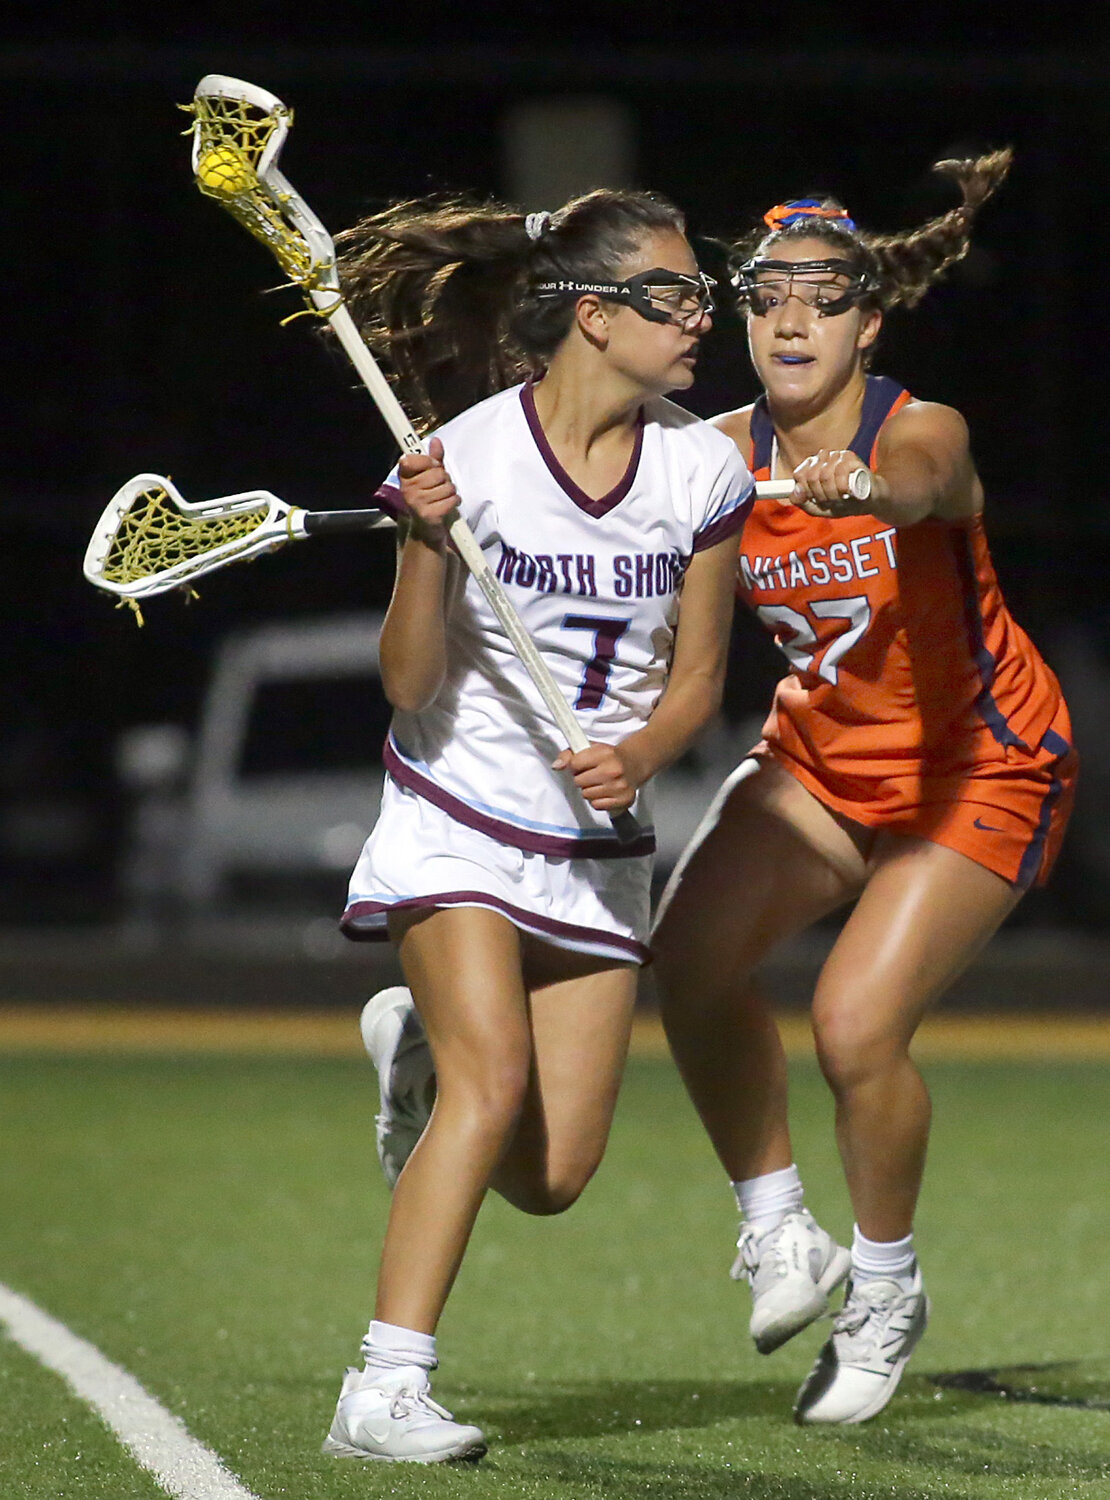 Daniela Martini, left, scored late in the first half to help the Vikings build a 9-6 lead at intermission in the Nassau Class C title game.